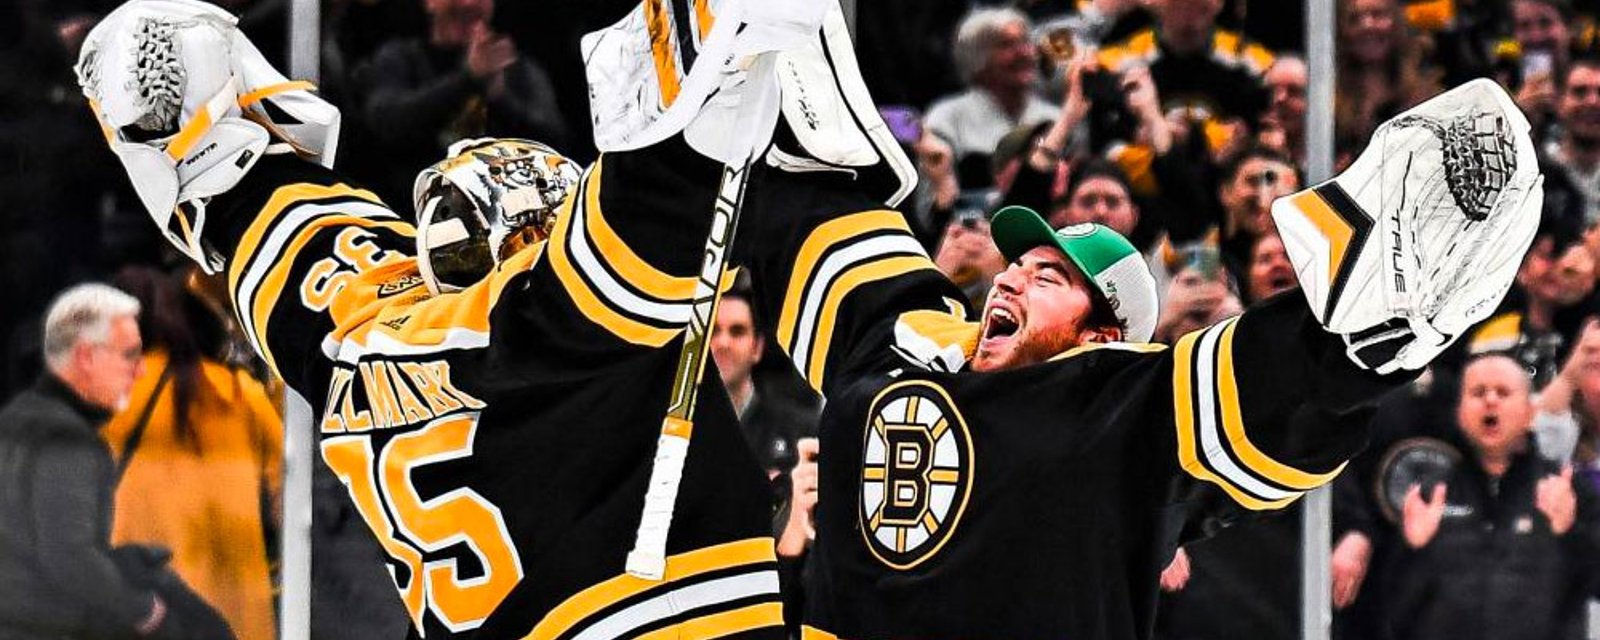 Reports that Bruins turned down Ullmark and Swayman trades